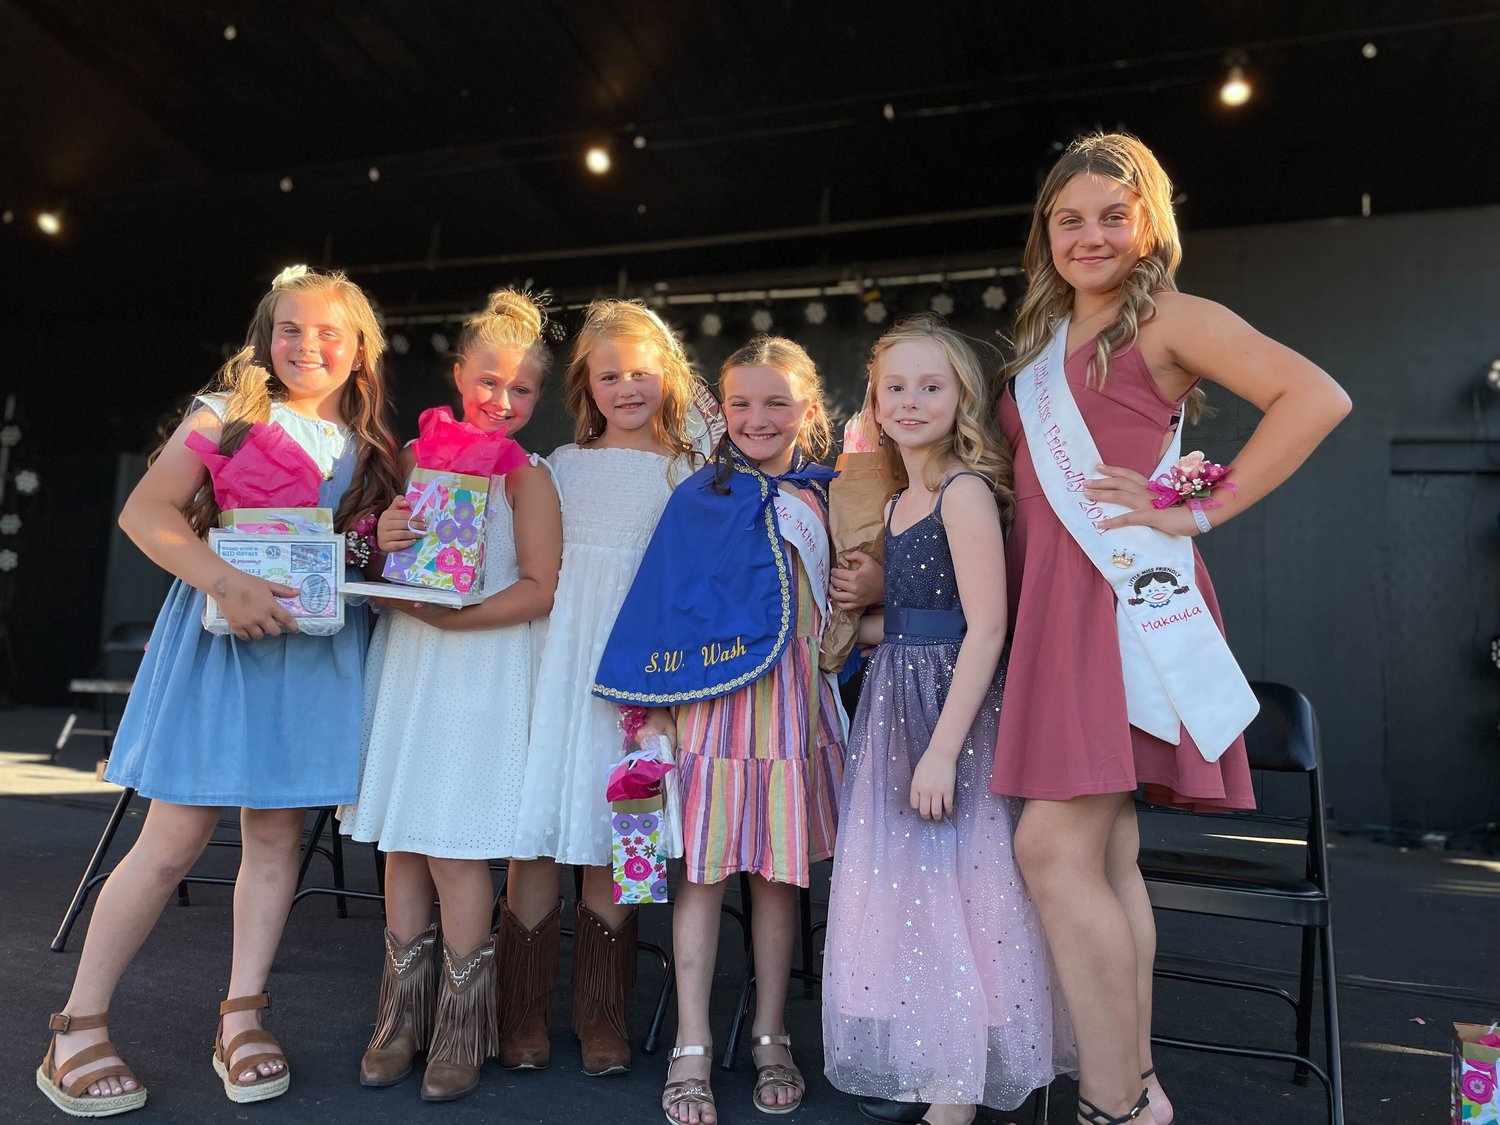 Emma Britton, a 9-year-old from Chehalis who attends Orin Smith Elementary School, has been named Little Miss Friendly at the SW Washington Fair. Emma comes from a friendly family: Her grandmother held the title many years ago. She’s the one at center wearing the iconic cape.